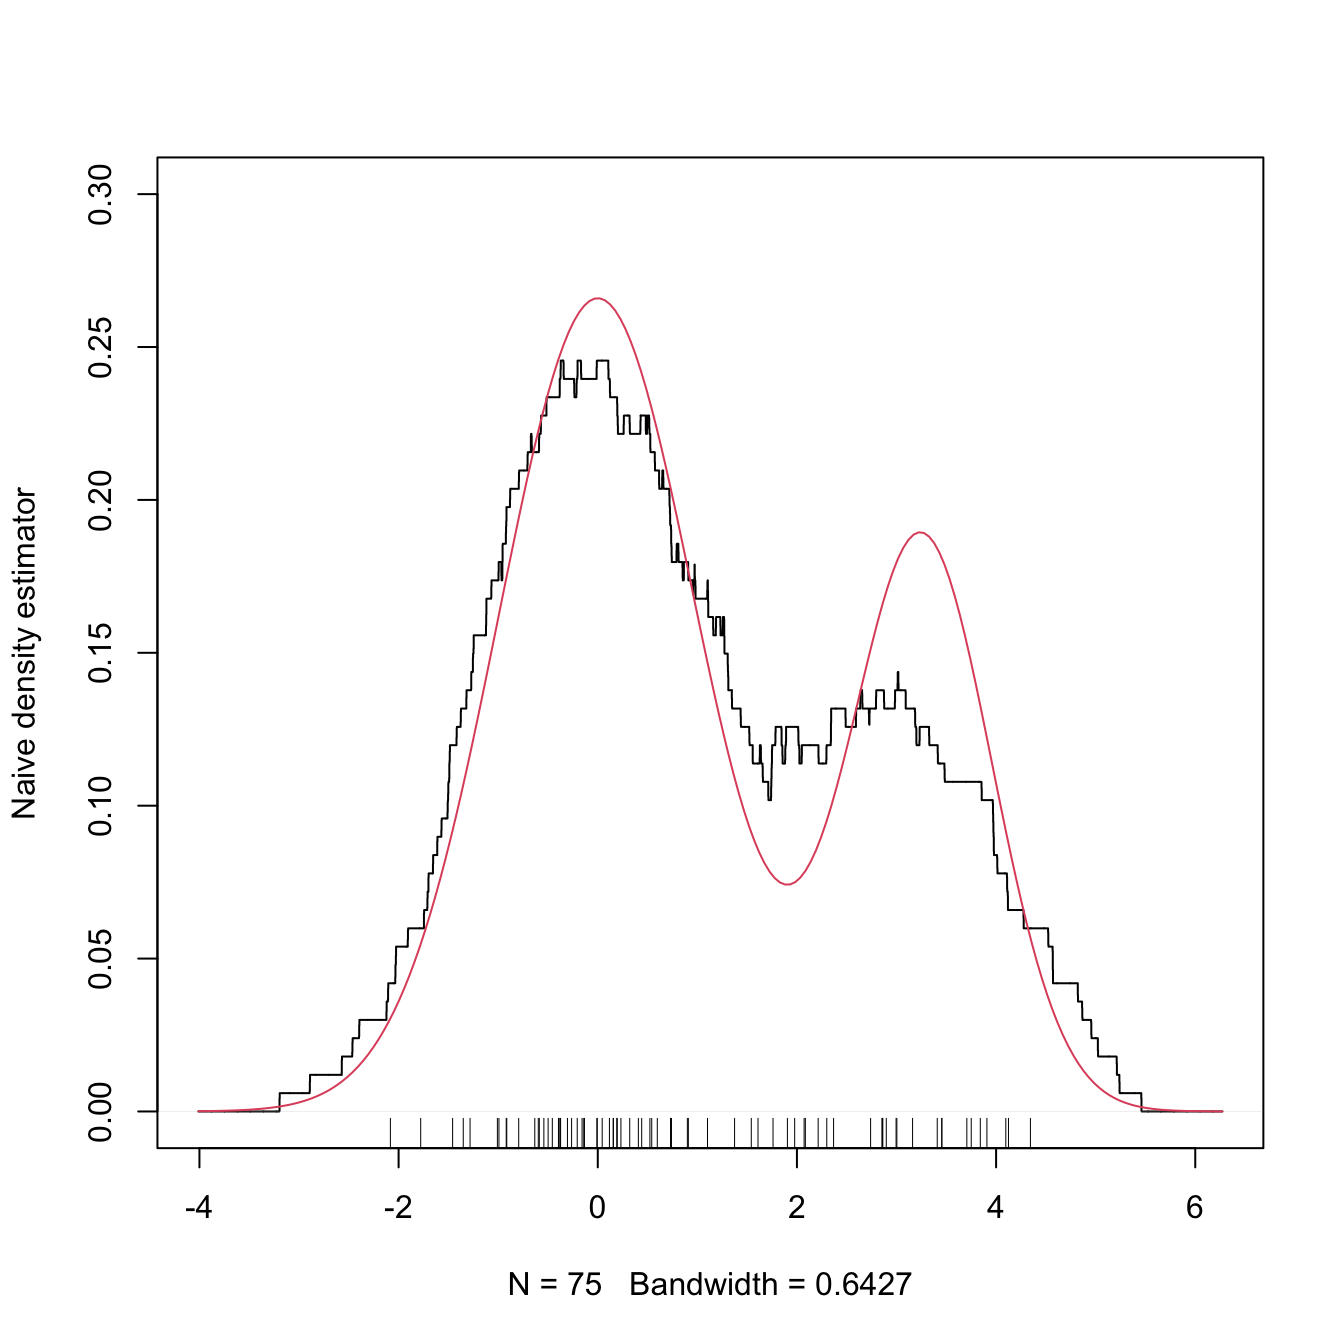 The naive density estimator \(\hat{f}_\mathrm{N}(\cdot;h)\) (black curve). The red curve represents the underlying pdf, a mixture of two normals.